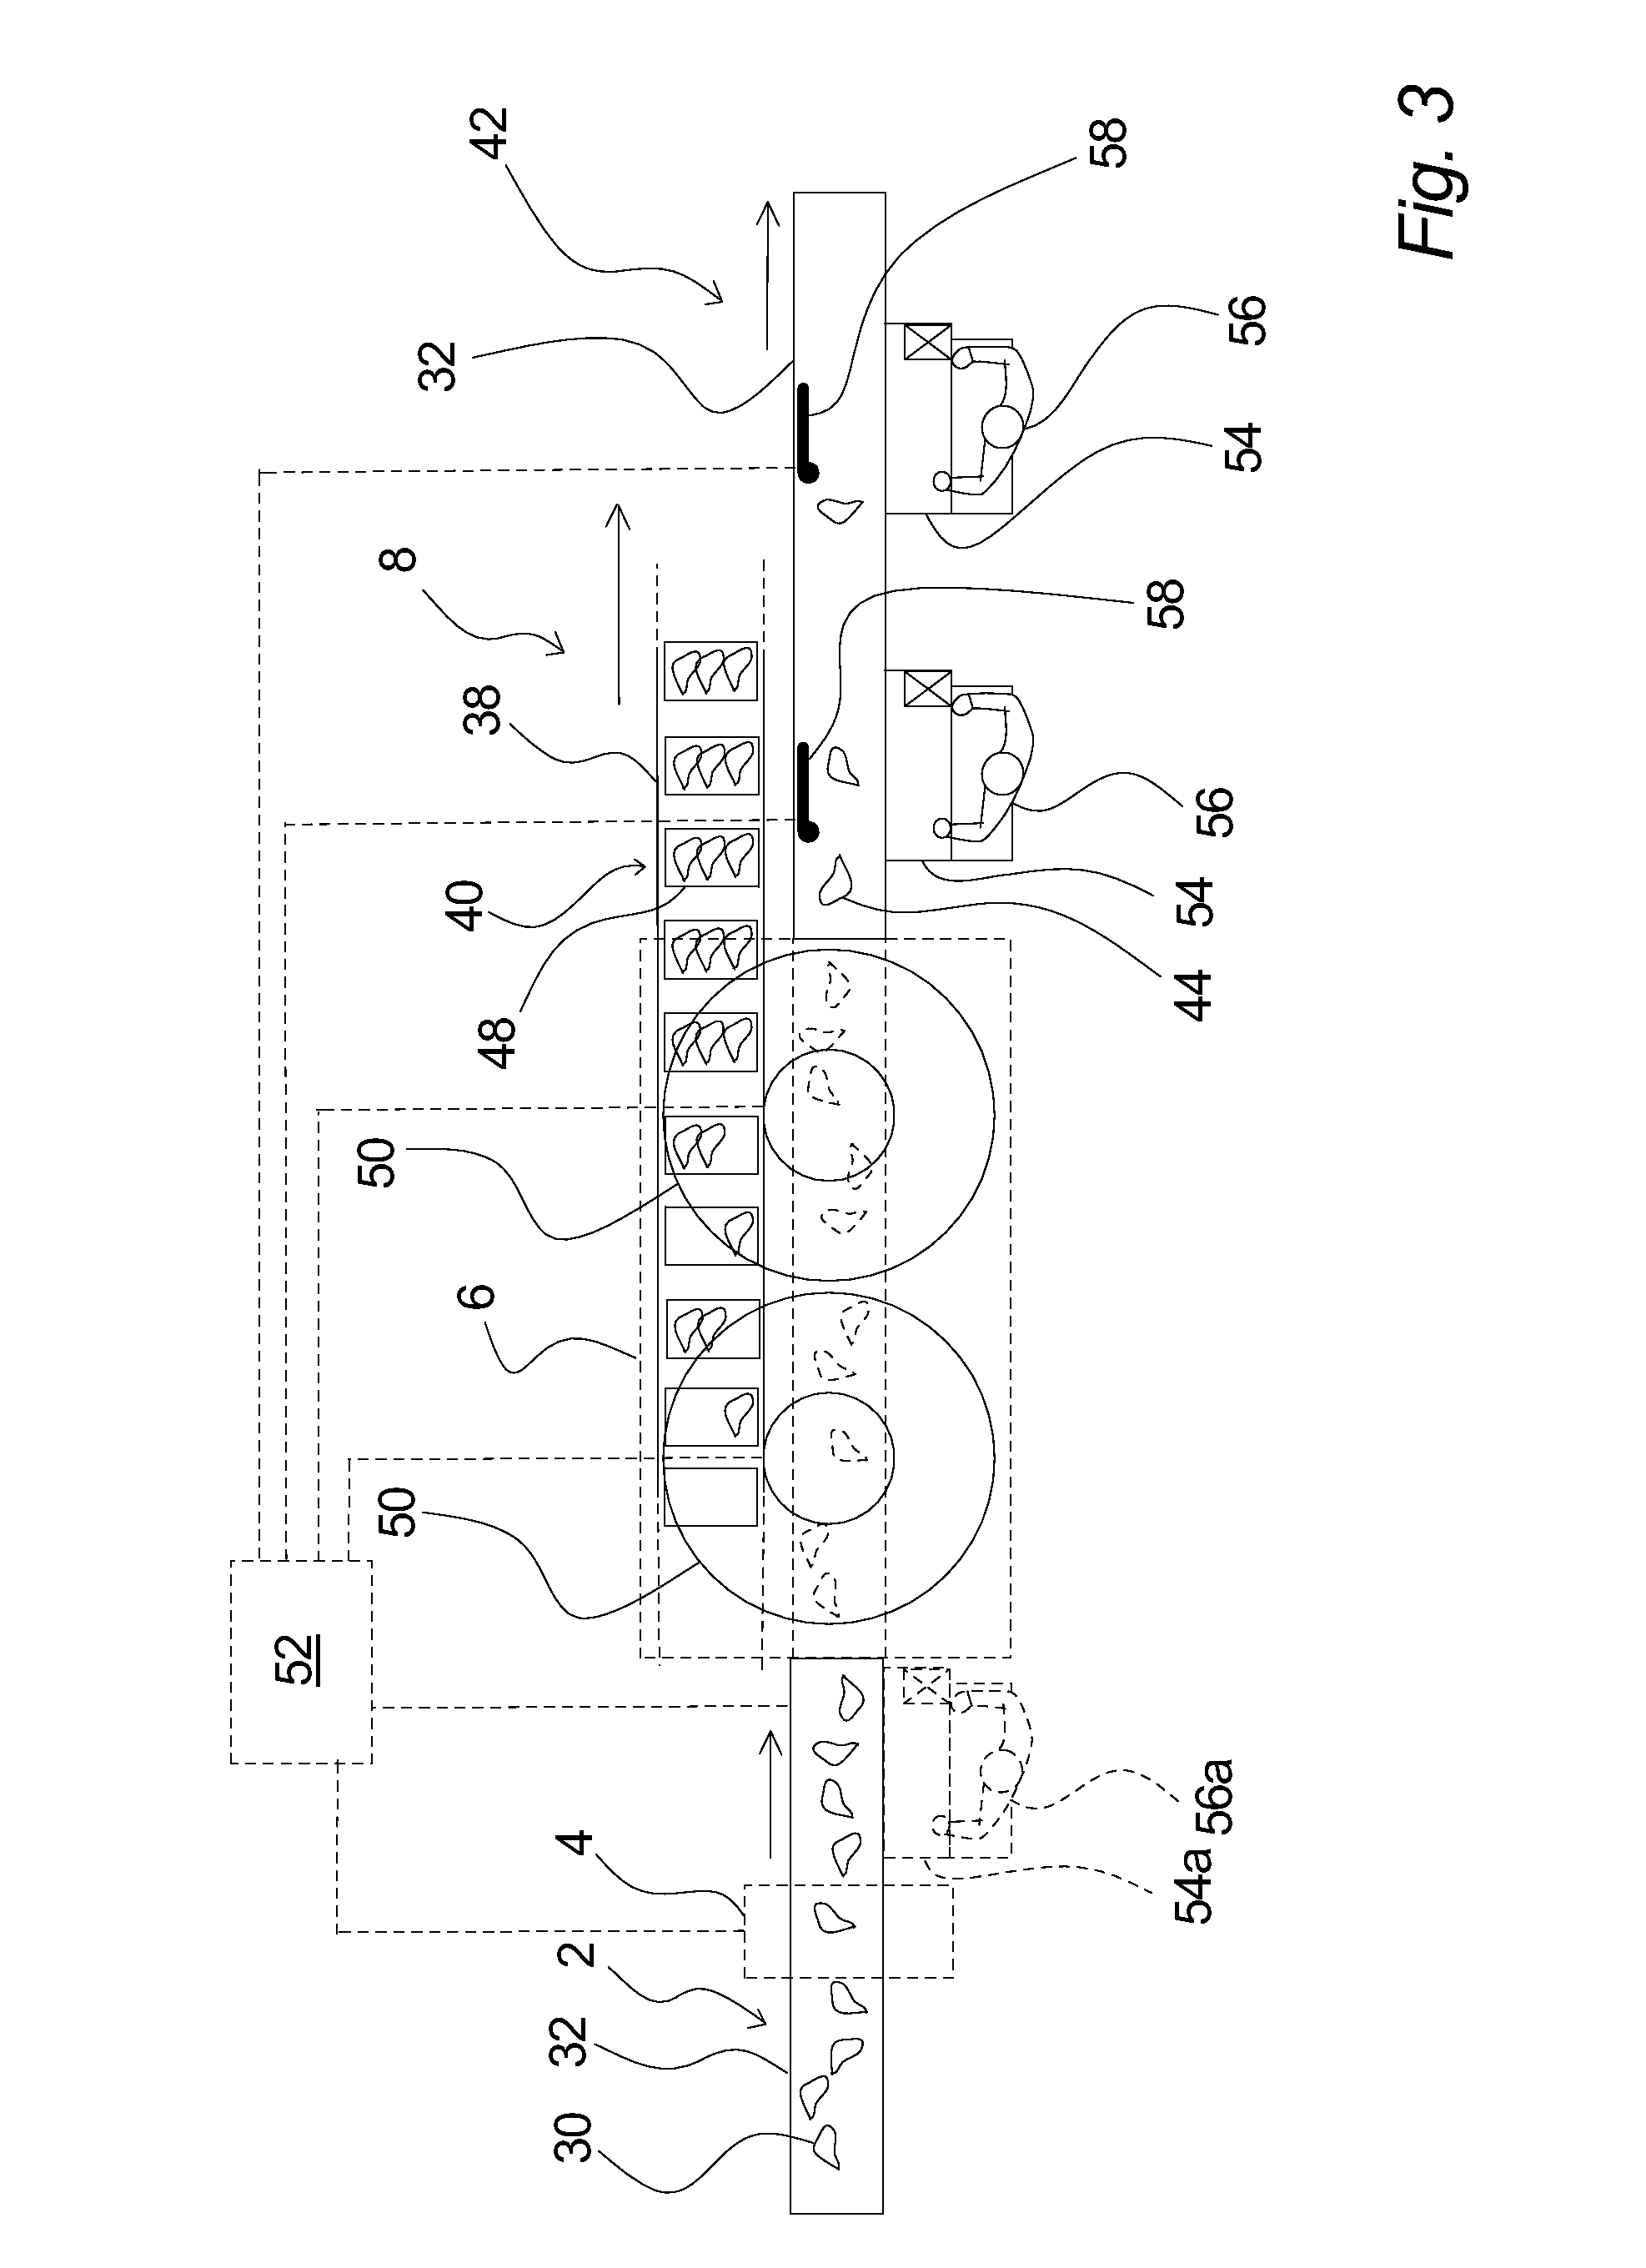 Method and system for processing of items